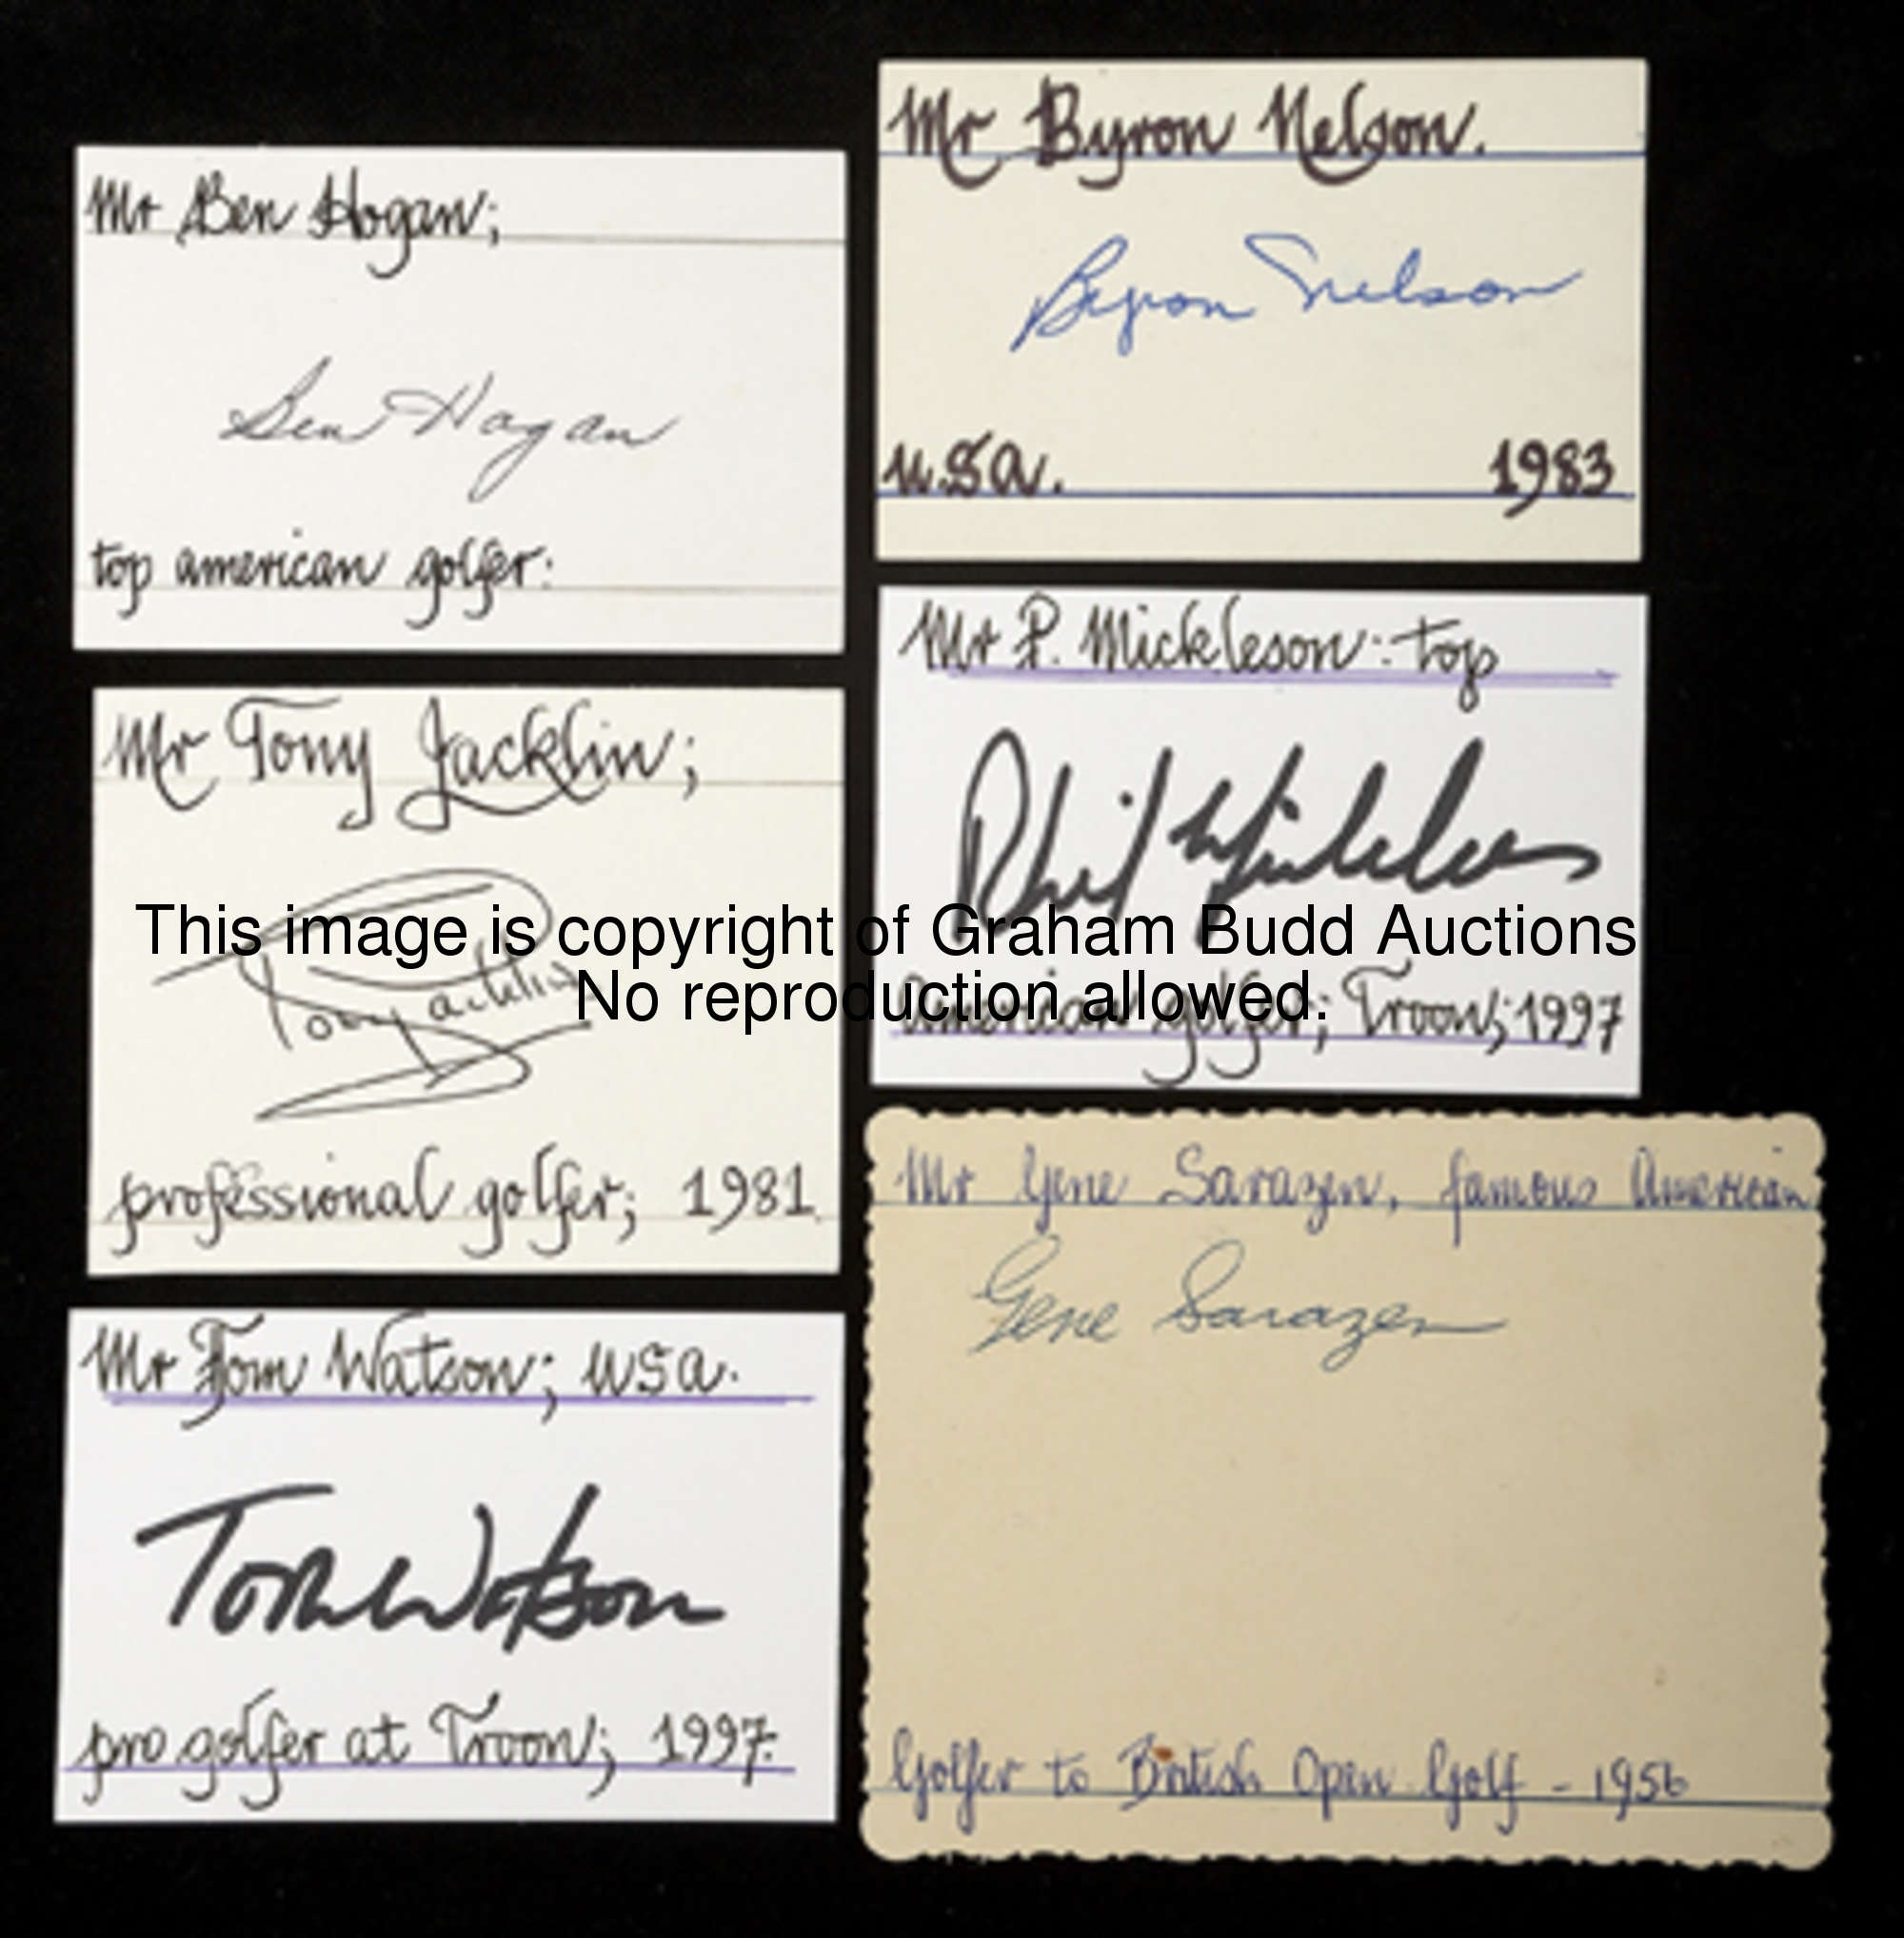 42 golfers autographs including many Majors winners, each signed on individual cards with manuscript...